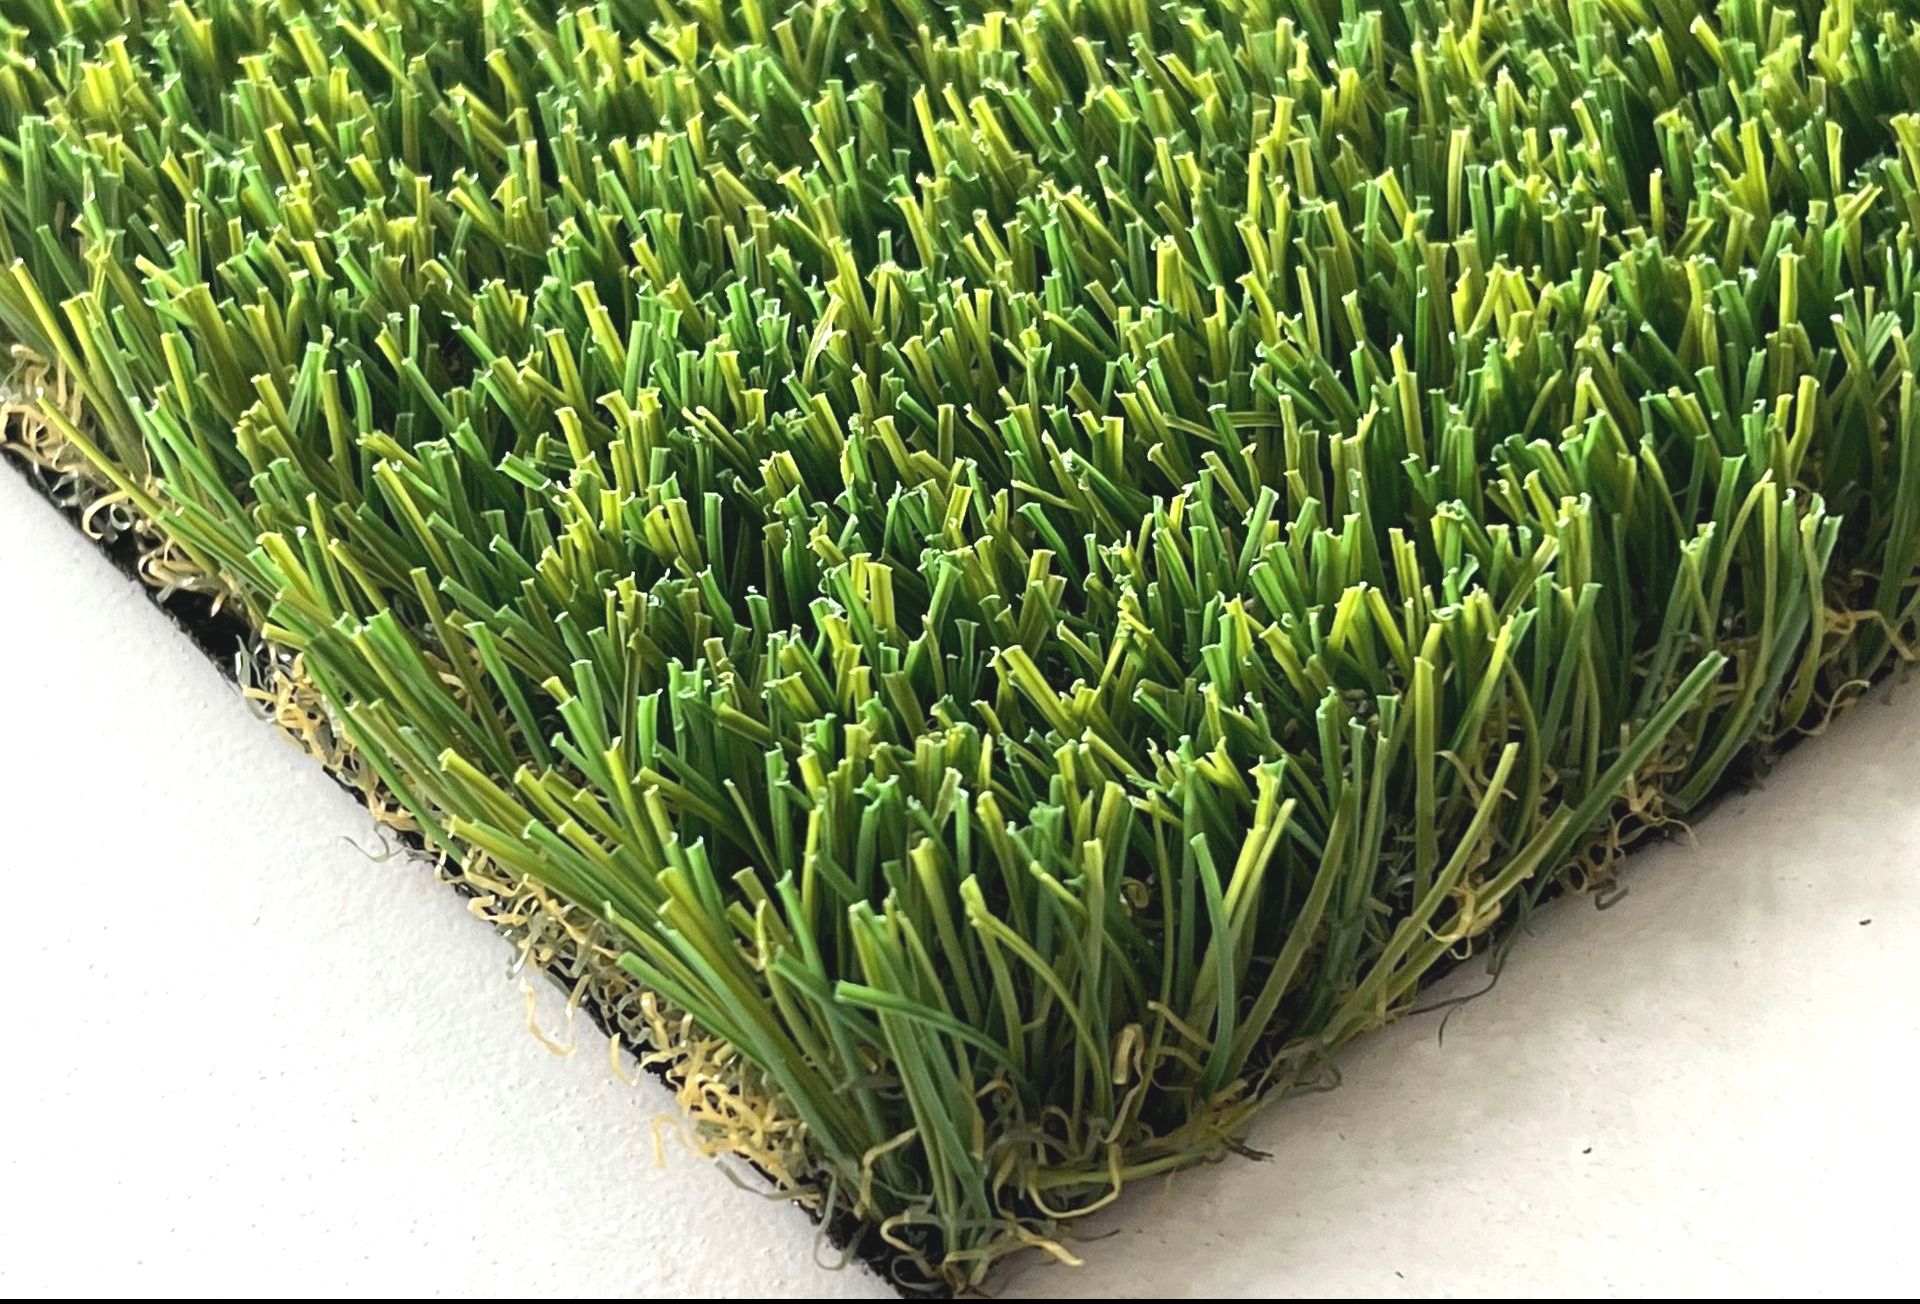 S-90 — Synthetic Turf in South San Francisco, CA